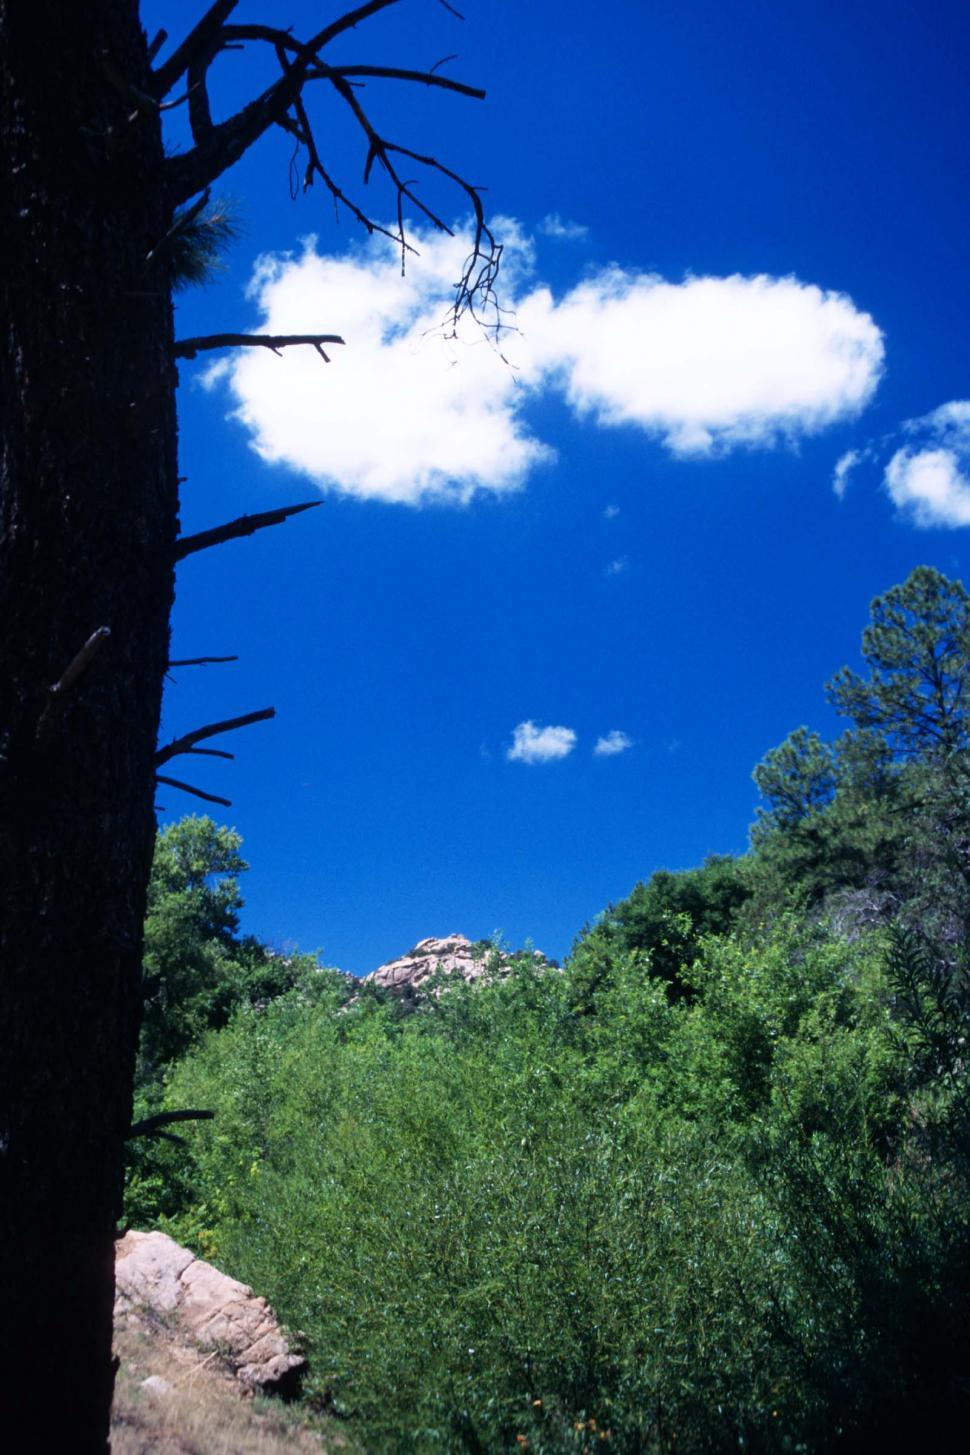 Free Image of prescott national forest mountains pines trees silhouette clouds 